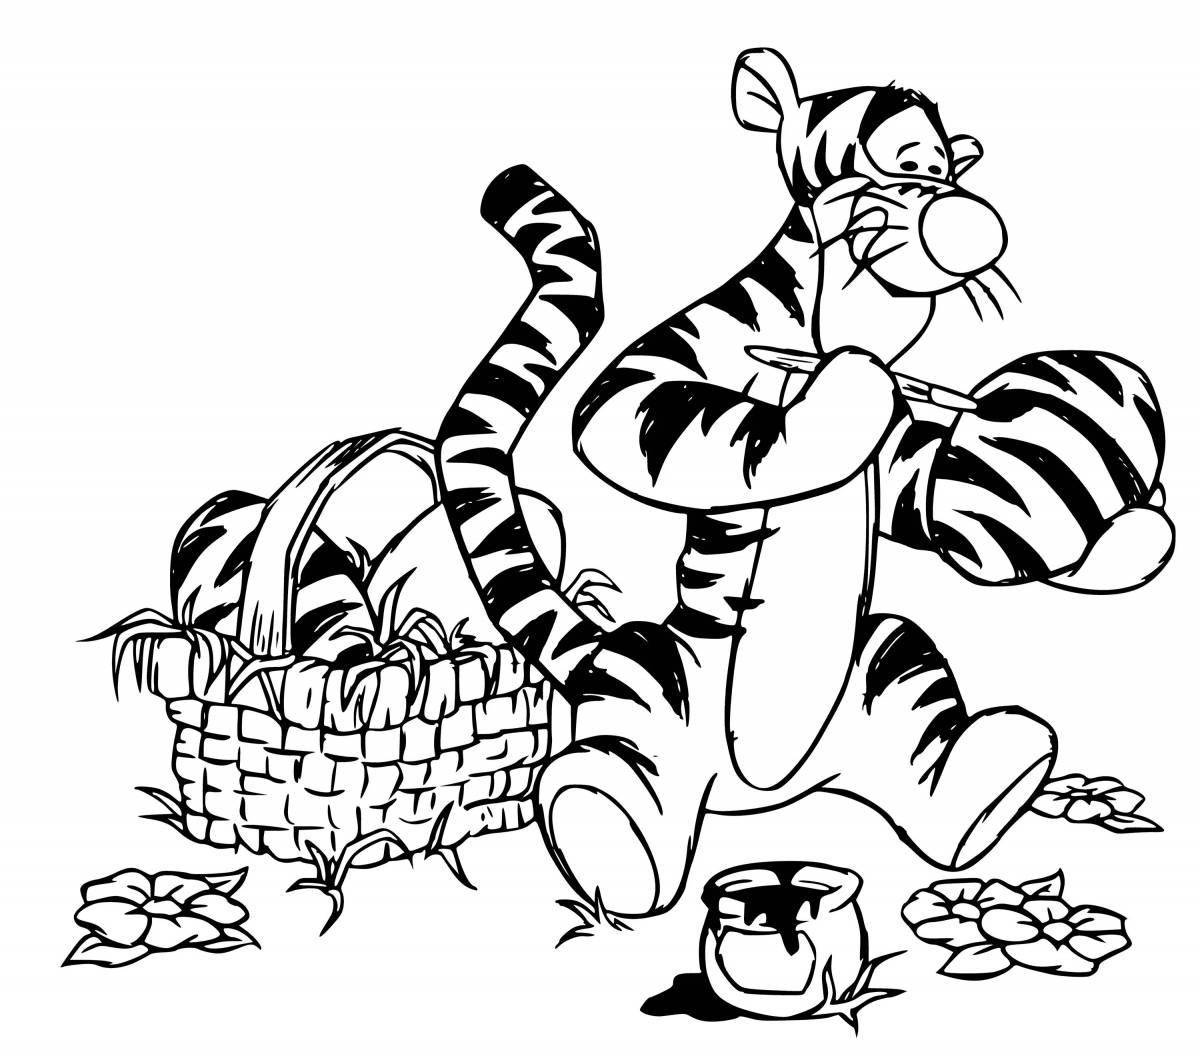 Tigress colorful coloring page